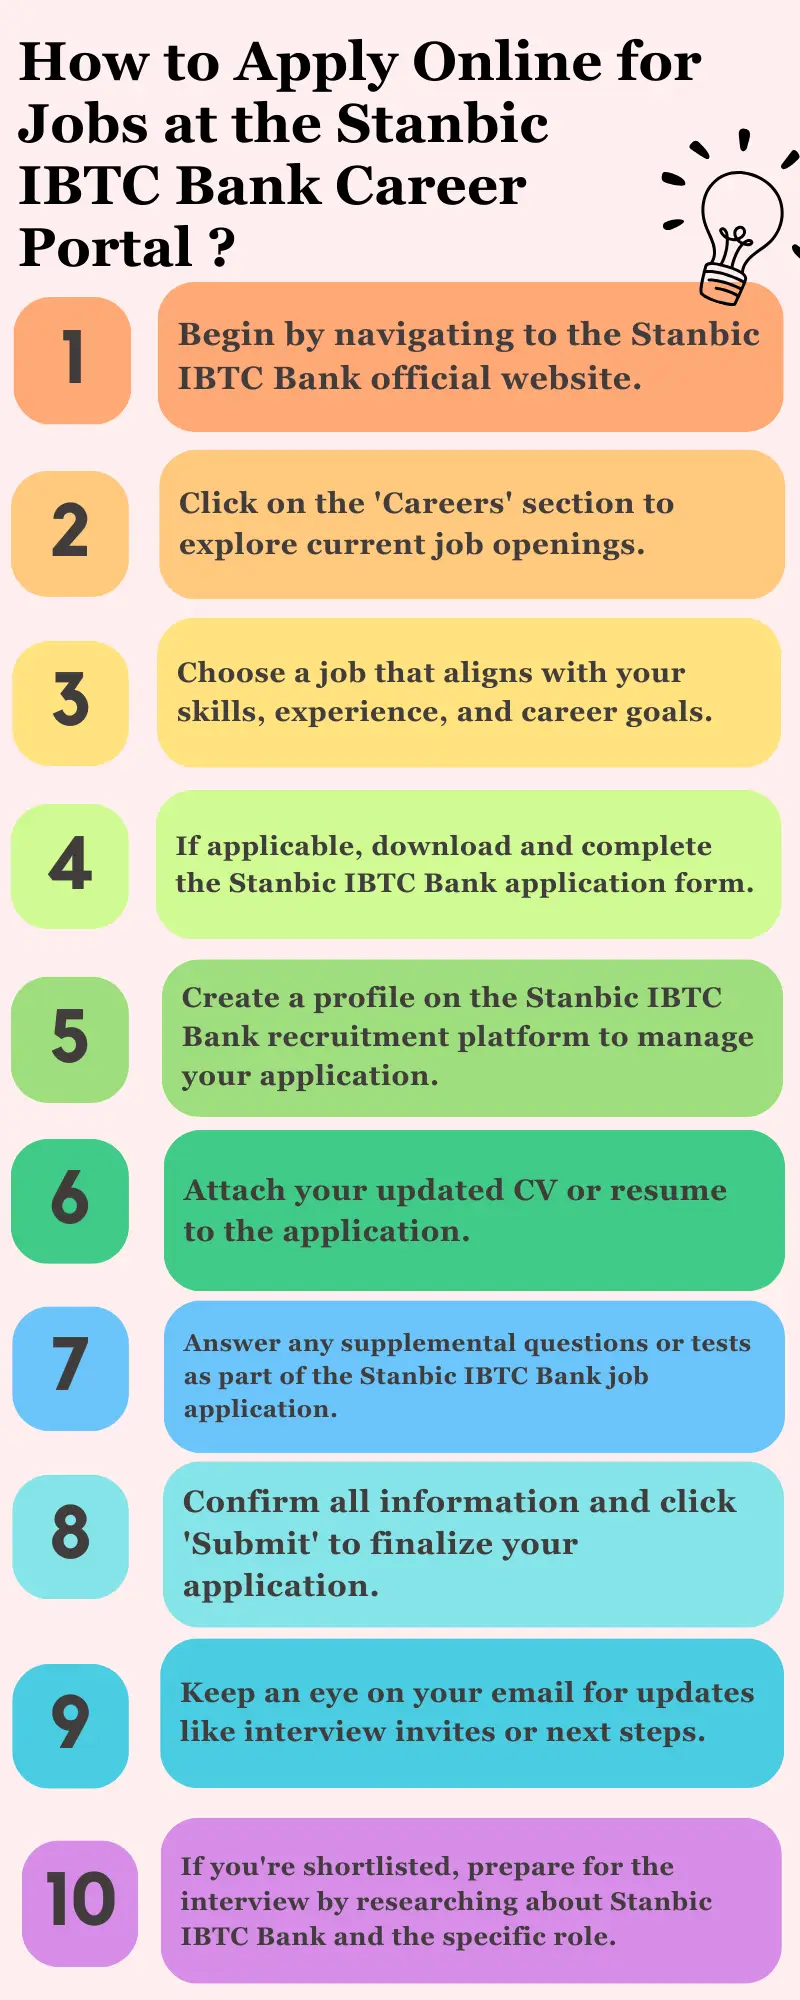 How to Apply Online for Jobs at the Stanbic IBTC Bank Career Portal ?